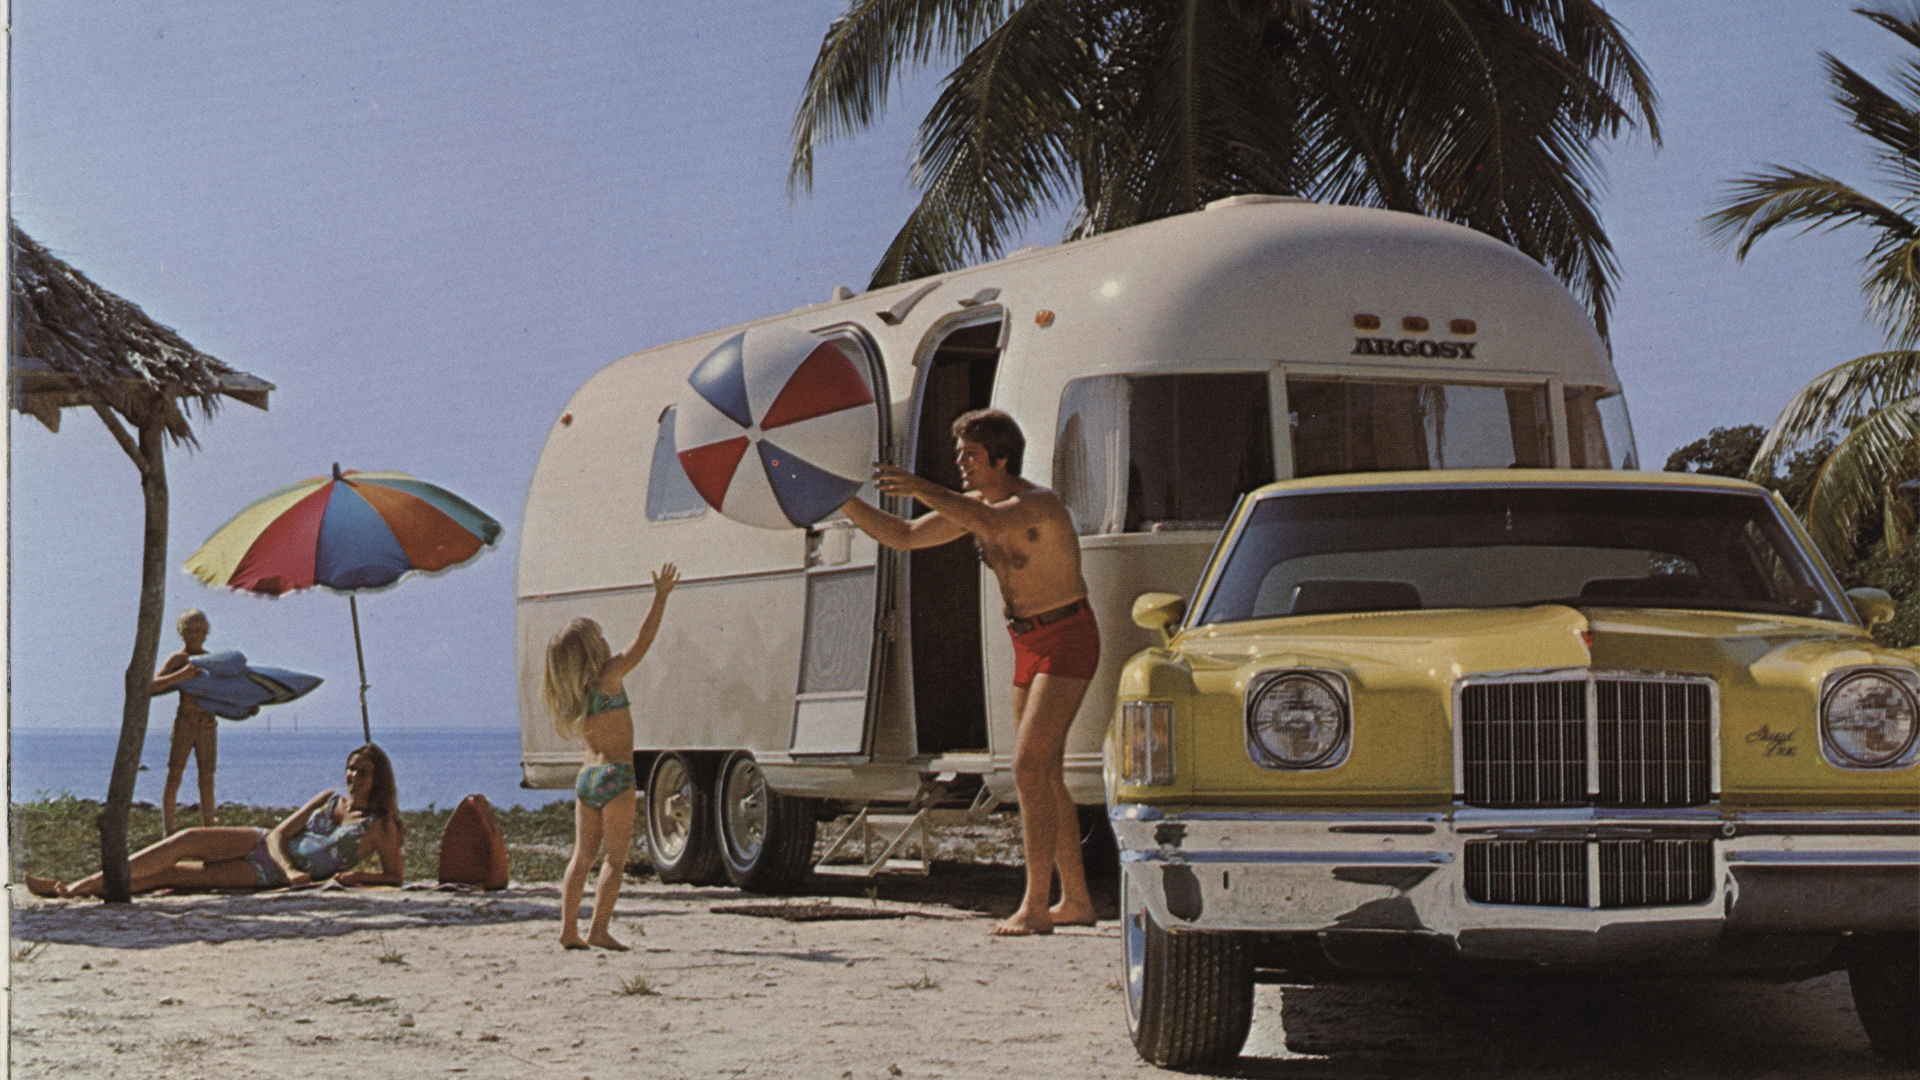 Airstream Argosy at the beach with a car towing and family playing outside